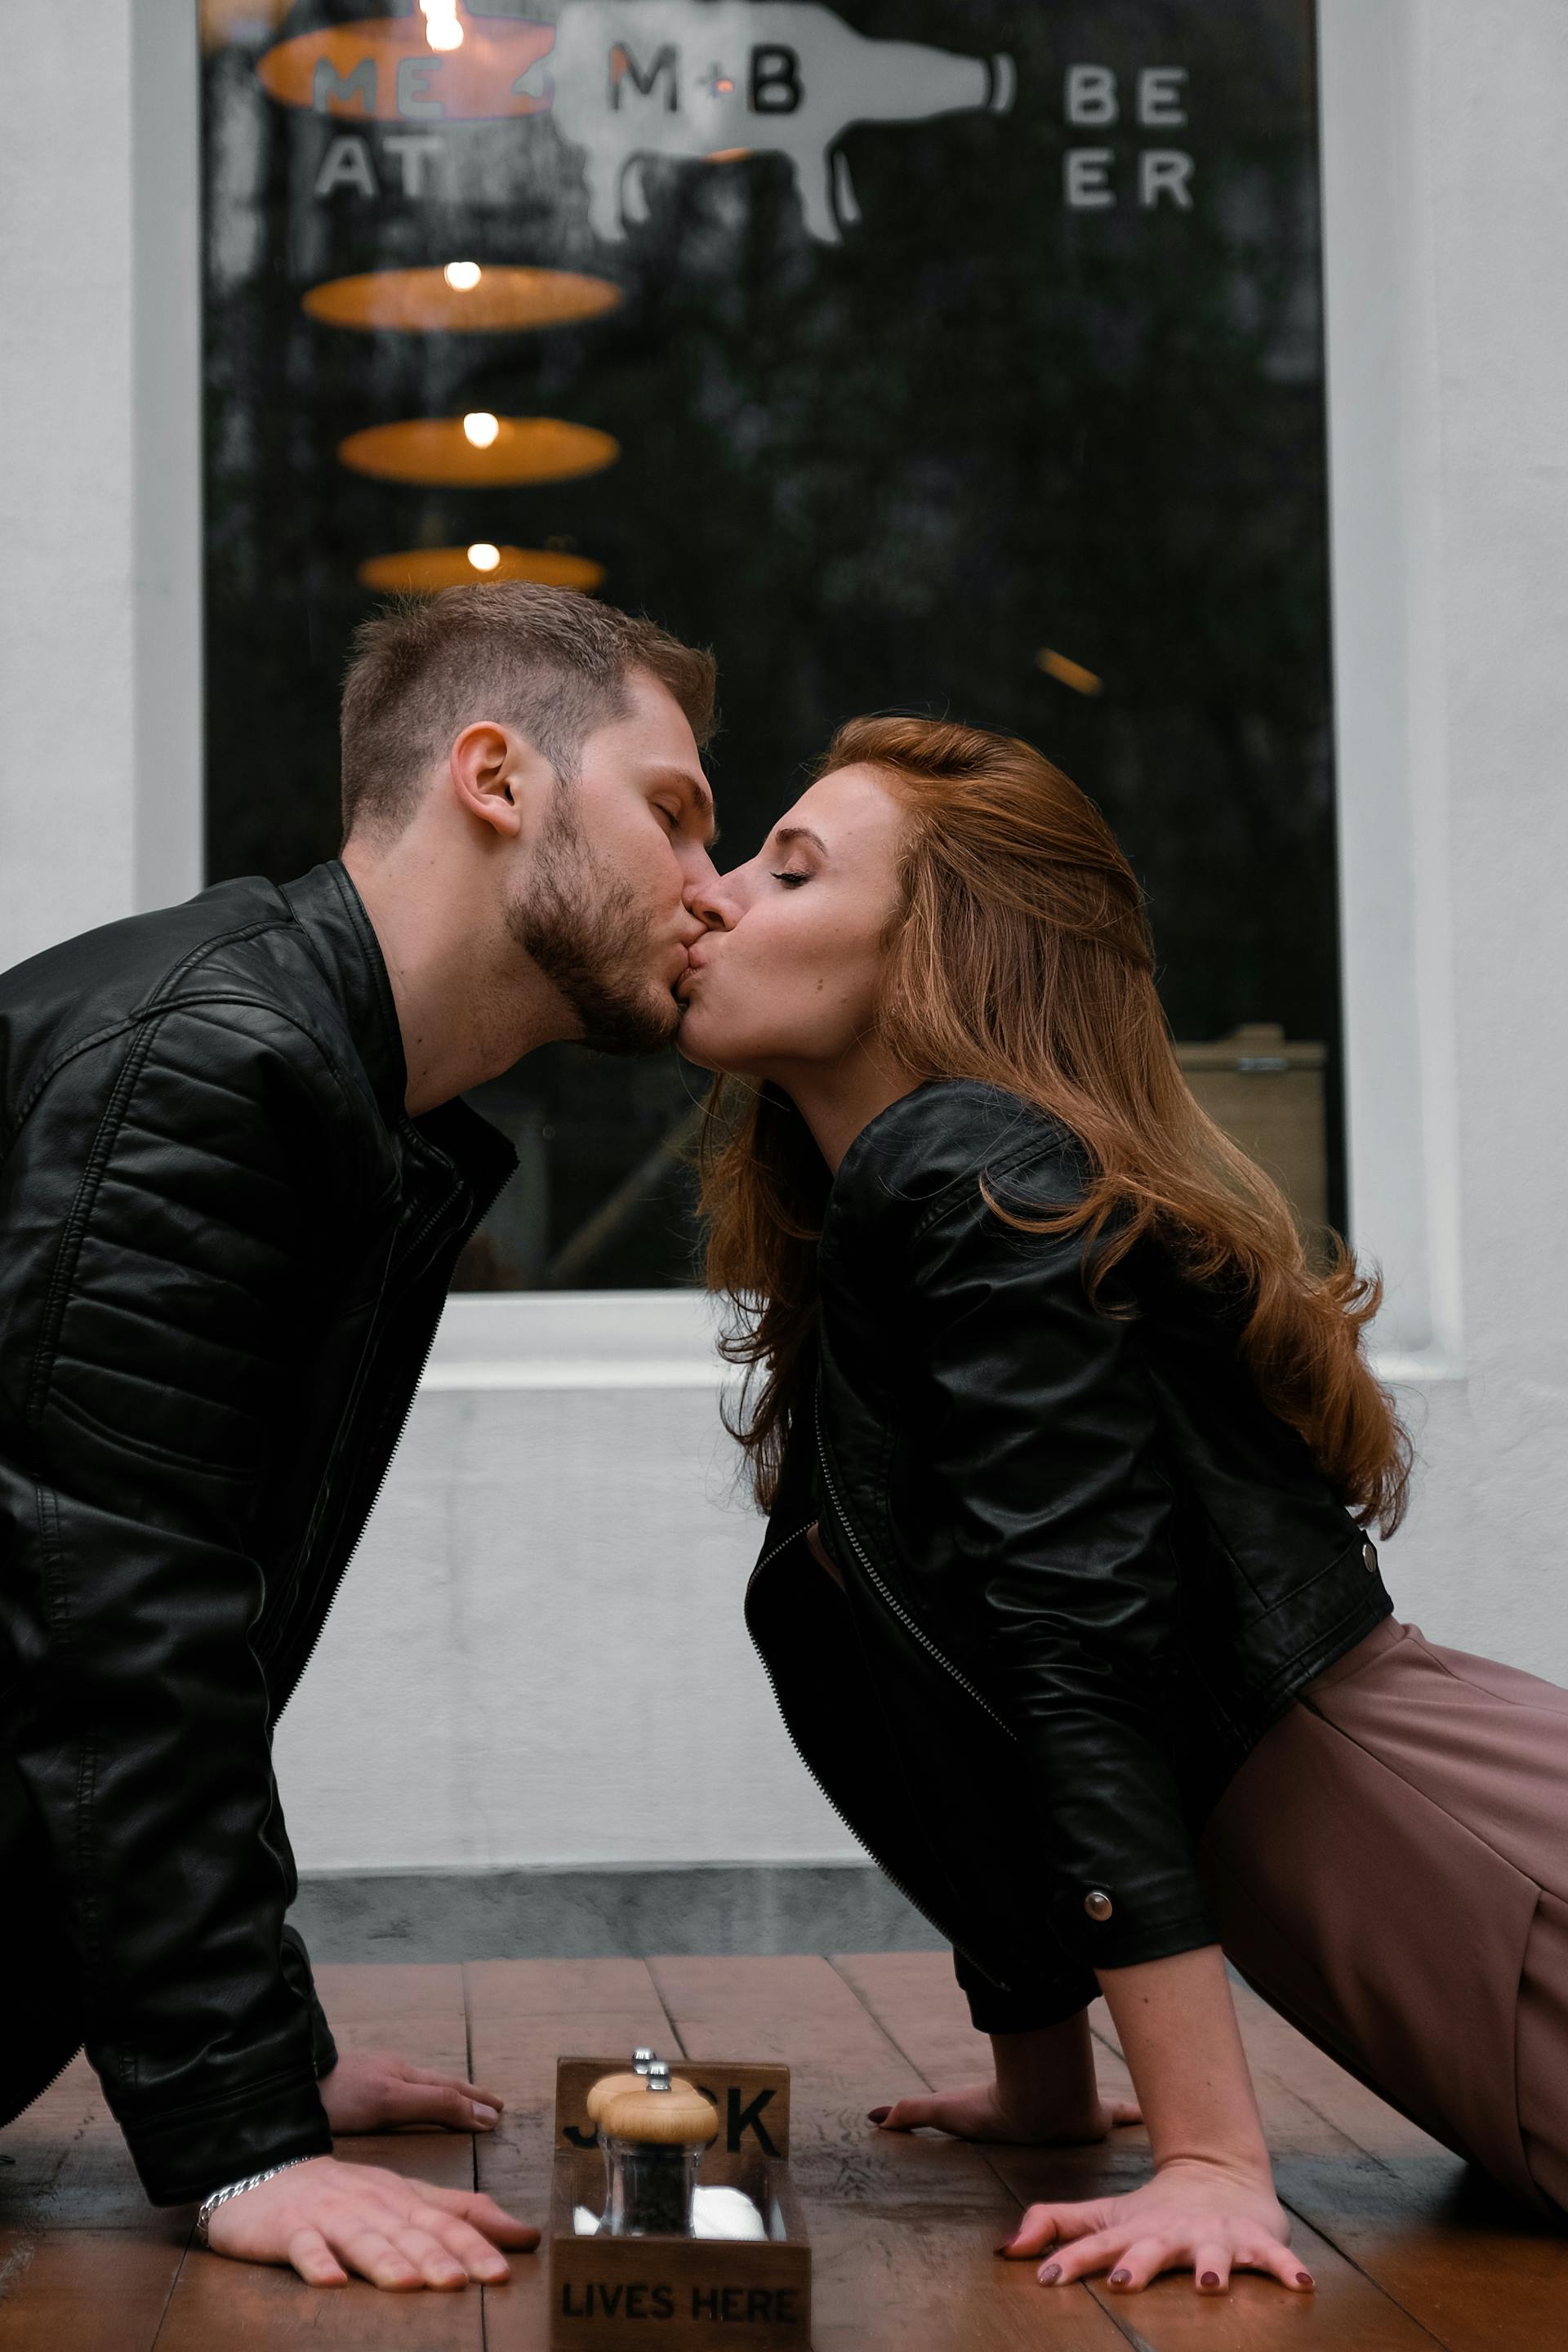 A man and woman kissing | Source: Pexels